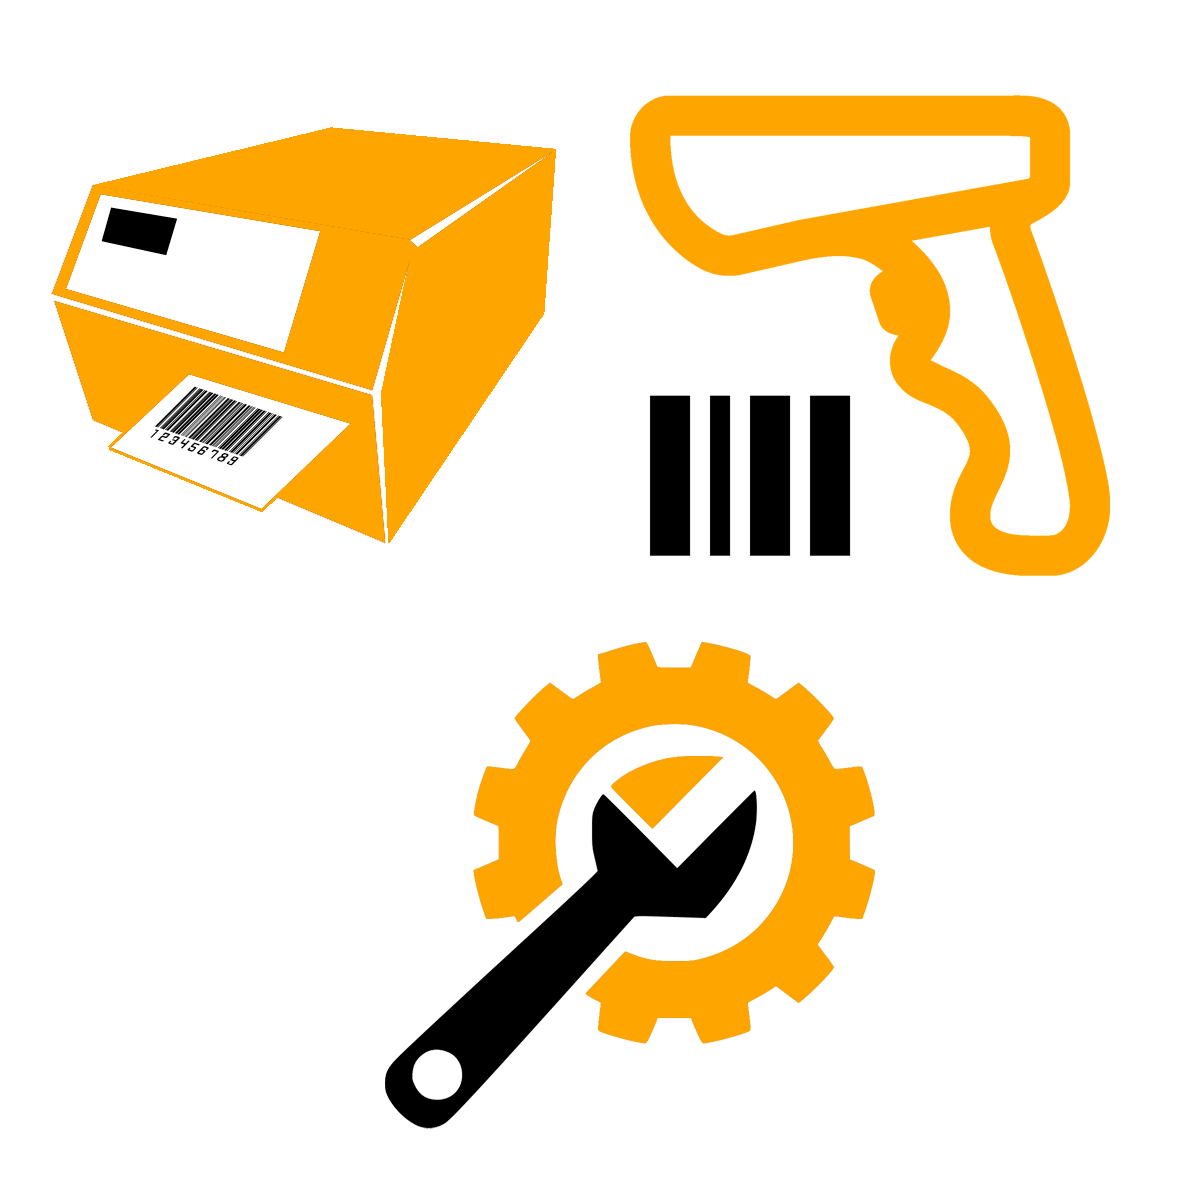 An image represents maintenance and repair services